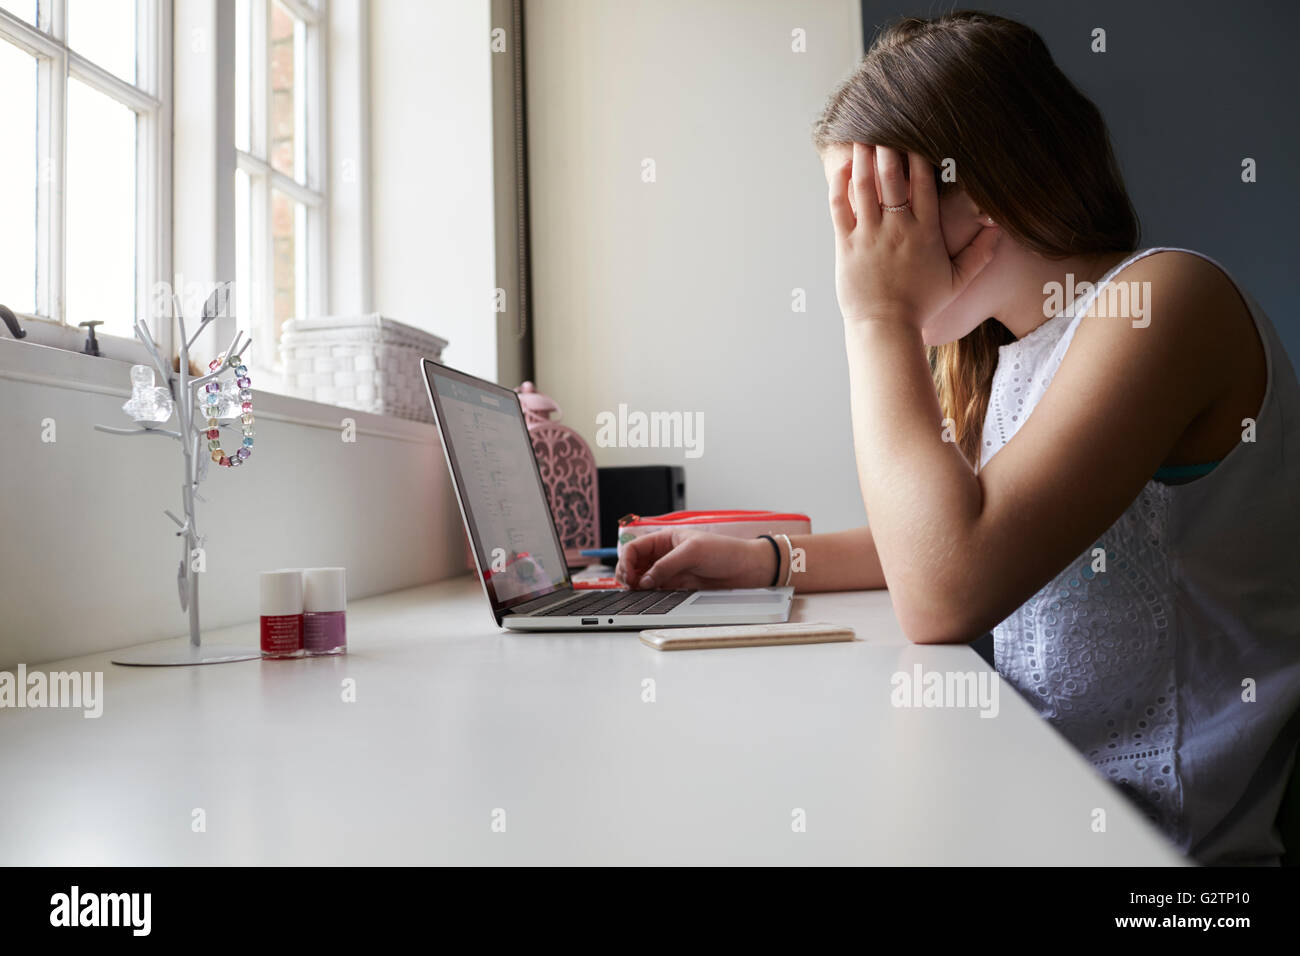 Unhappy Teenage Victim Of Online Bullying In Bedroom Stock Photo